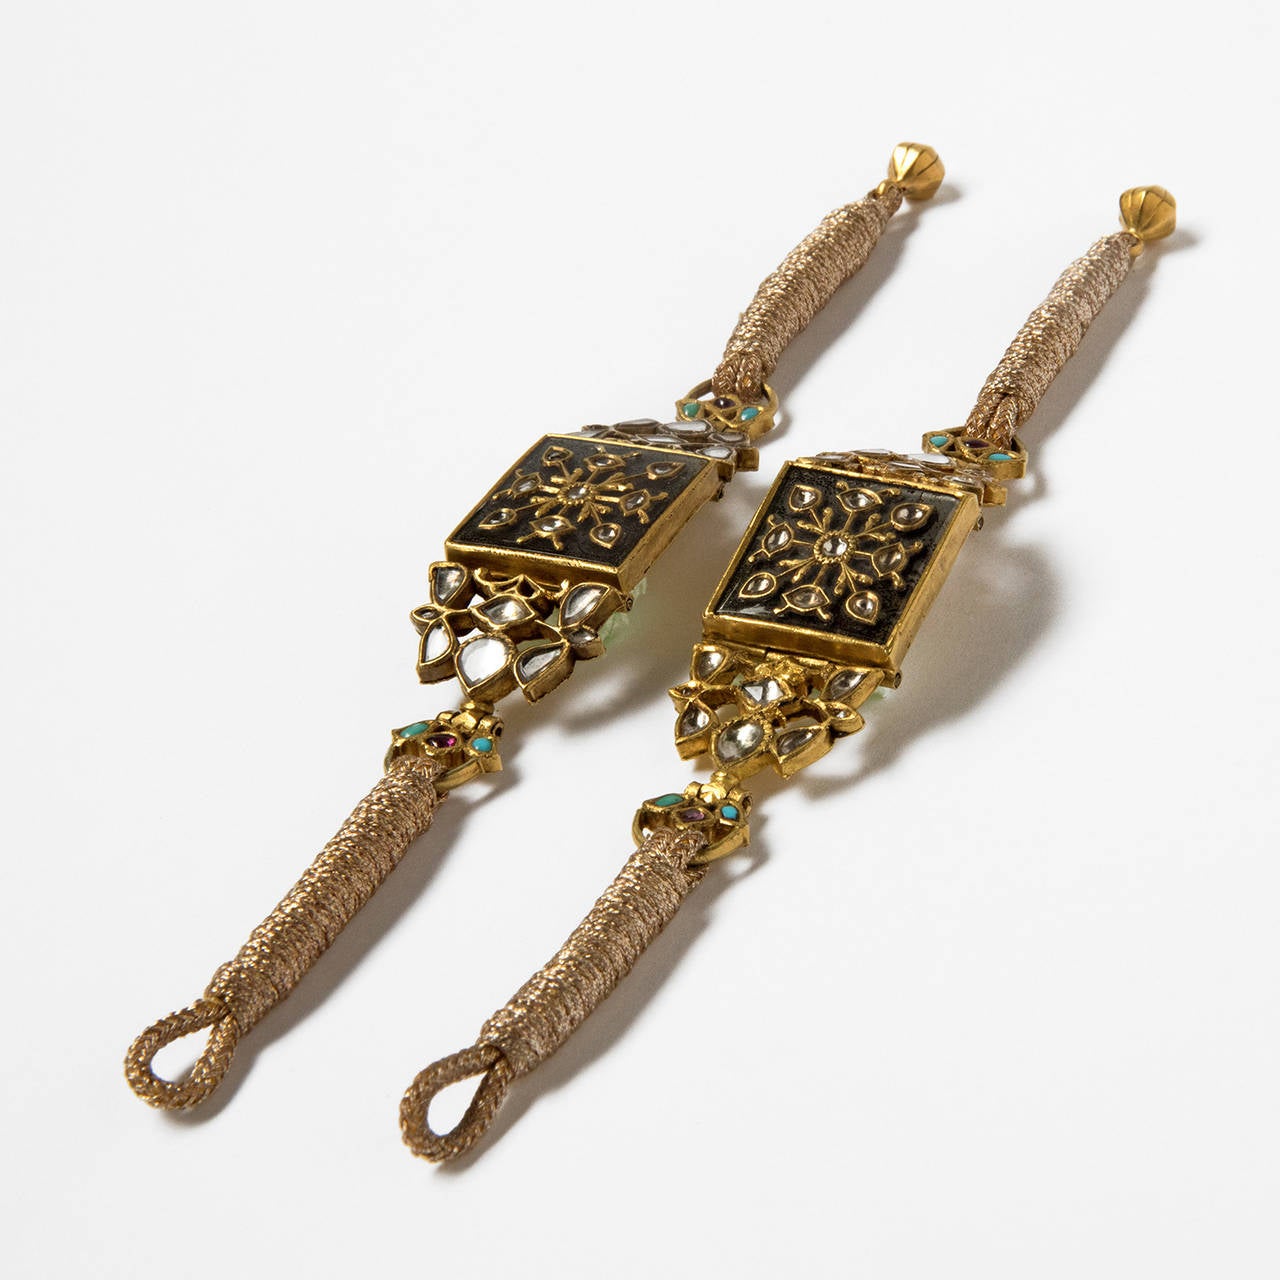 A pair of gold BAJU BAND,  the rectangular centre piece a square plaque, kundan set with rock crystal in gold collets on a base of foiled rock crystal, in gold frame, flanked by openworked trefoils, attached at an angle facilitating comfort to the